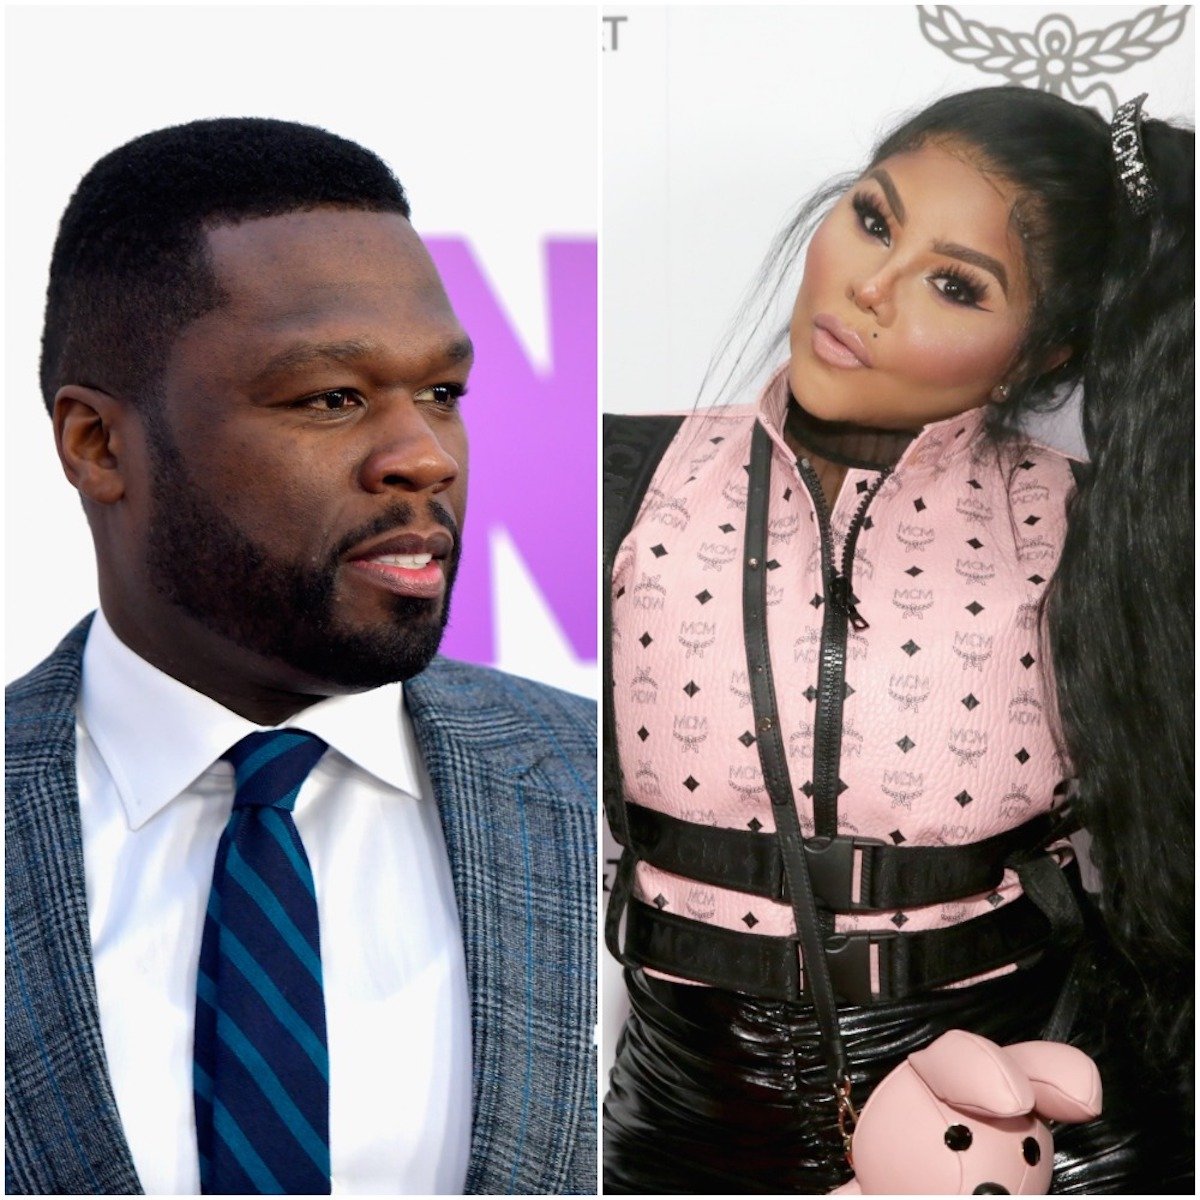 Lil Kim Clapped Back at 50 Cent for Dissing Her Looks